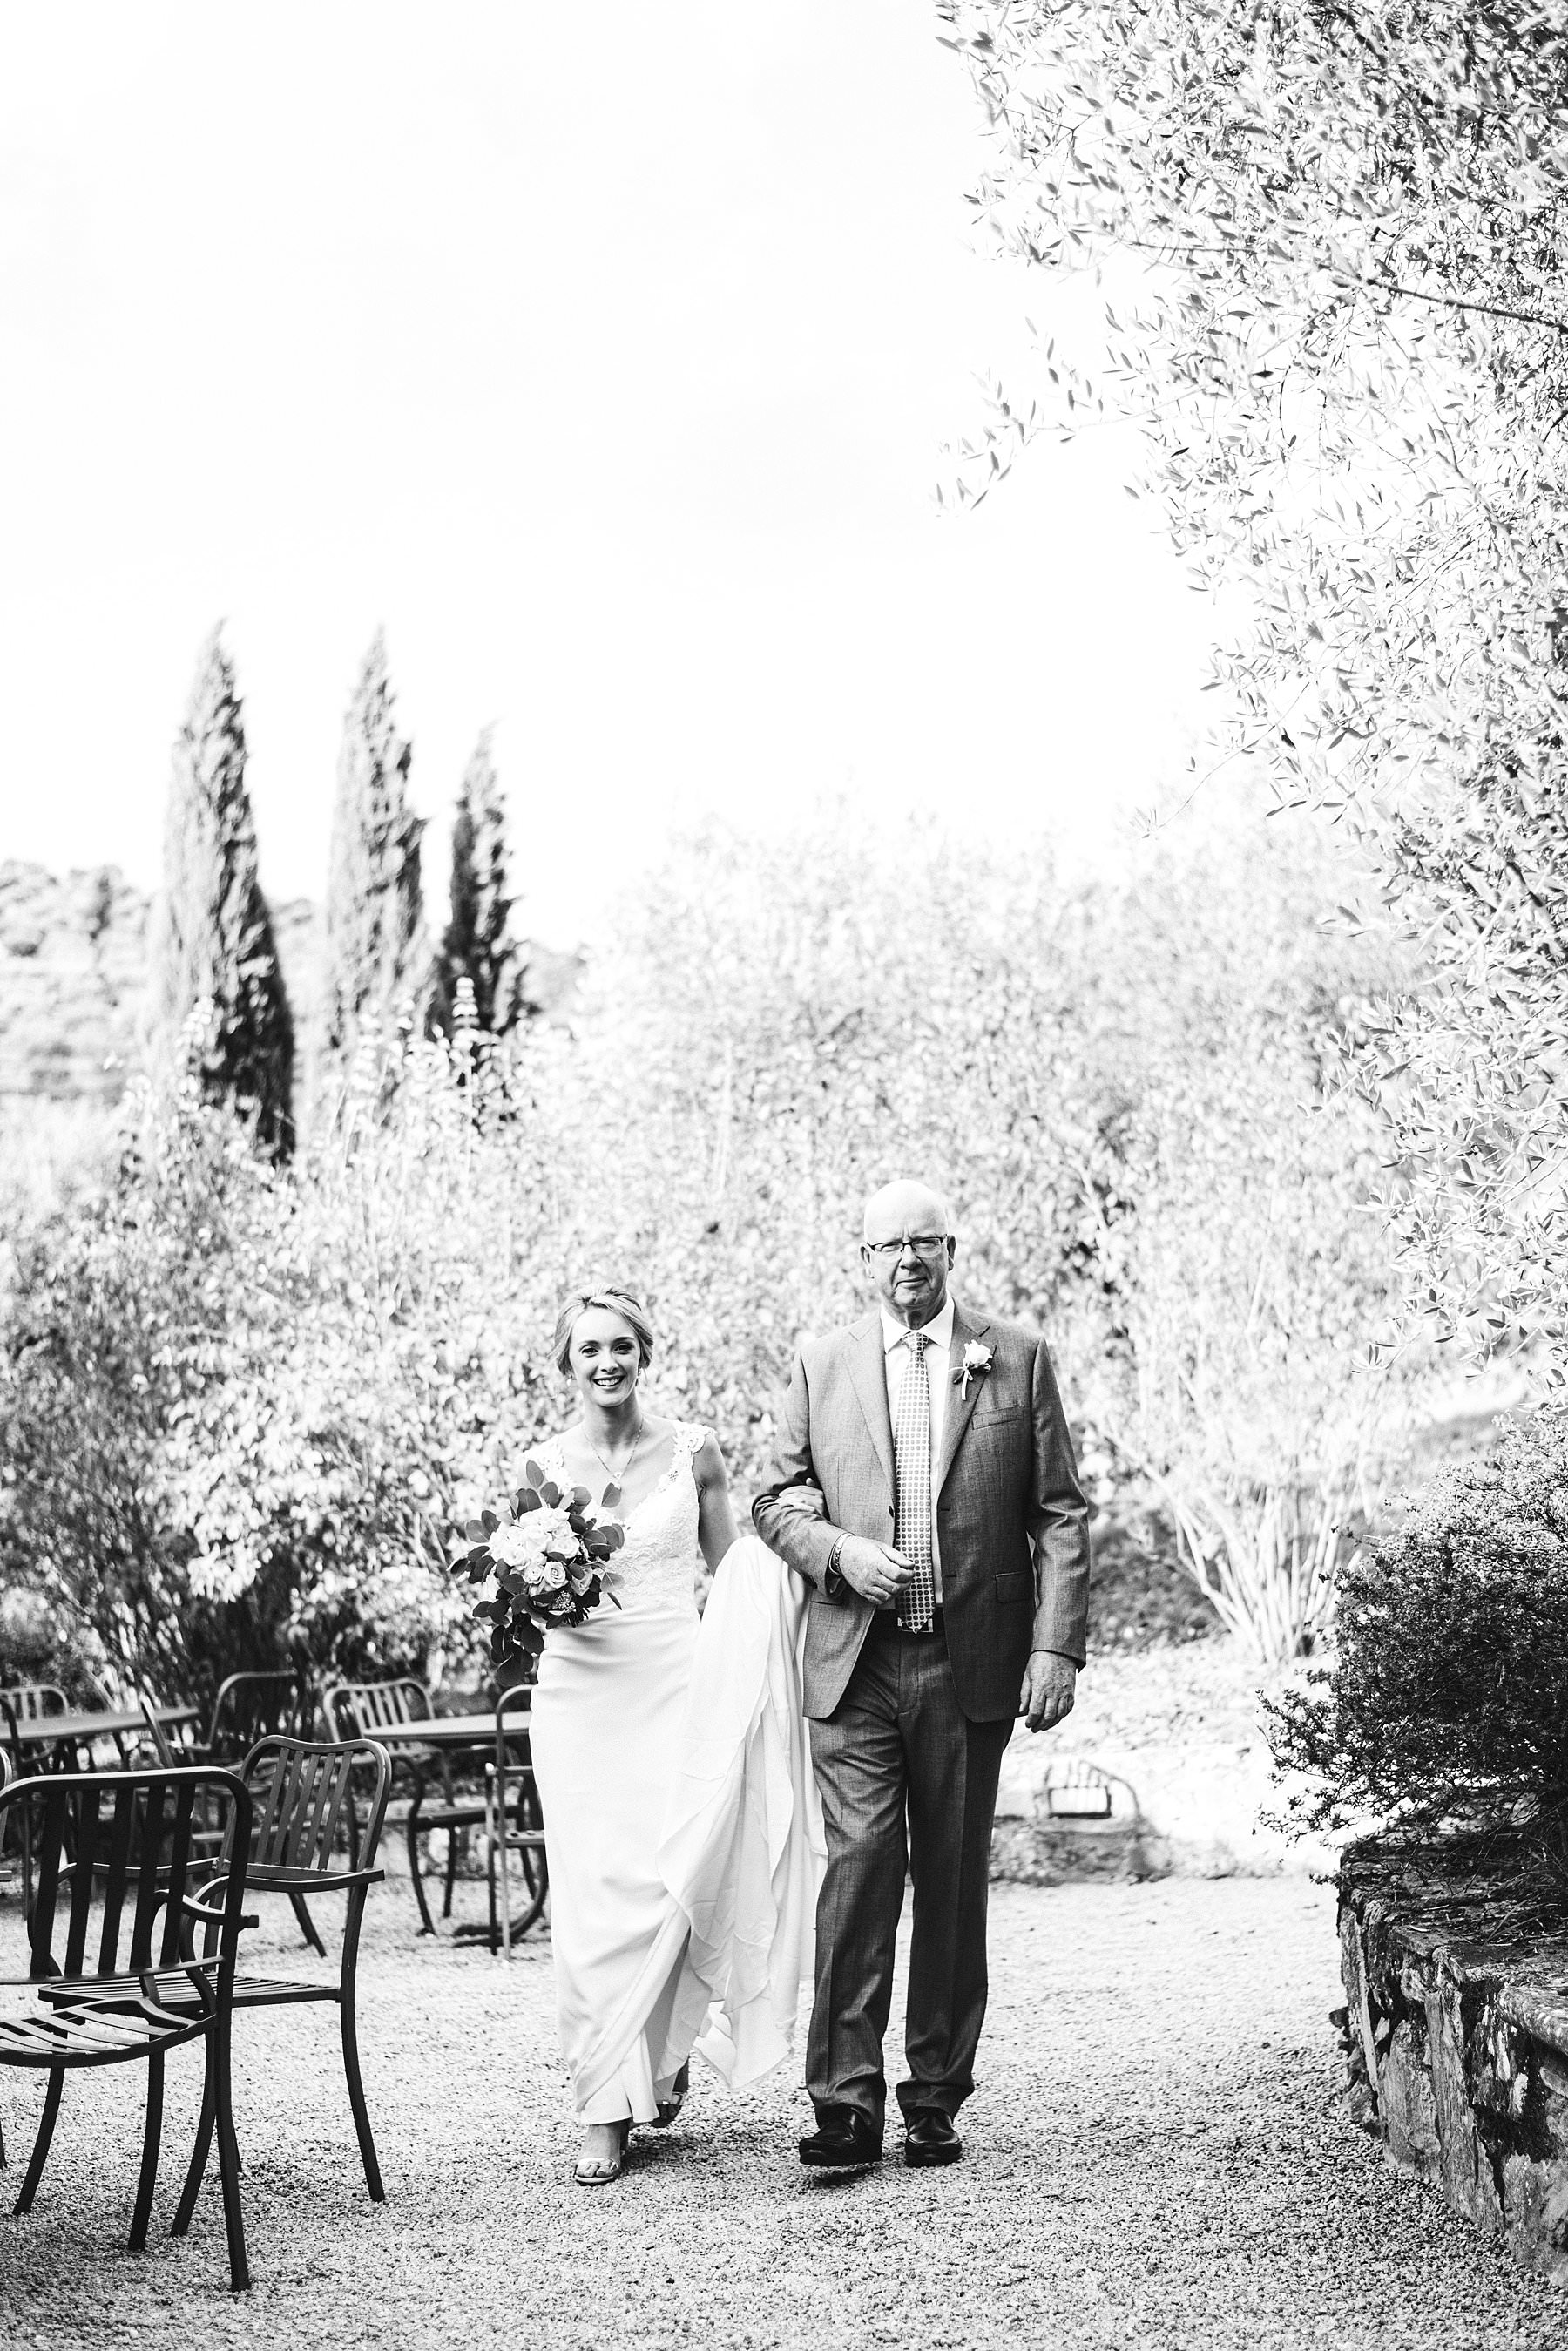 A special international wedding in the countryside of Umbria, Italy. Elegant Australian bride Jennifer walks with father in the symbolic ceremony held in a courtyard close to the Villa Monte Solare, surrounded by greenery and decorated with delicate flowers